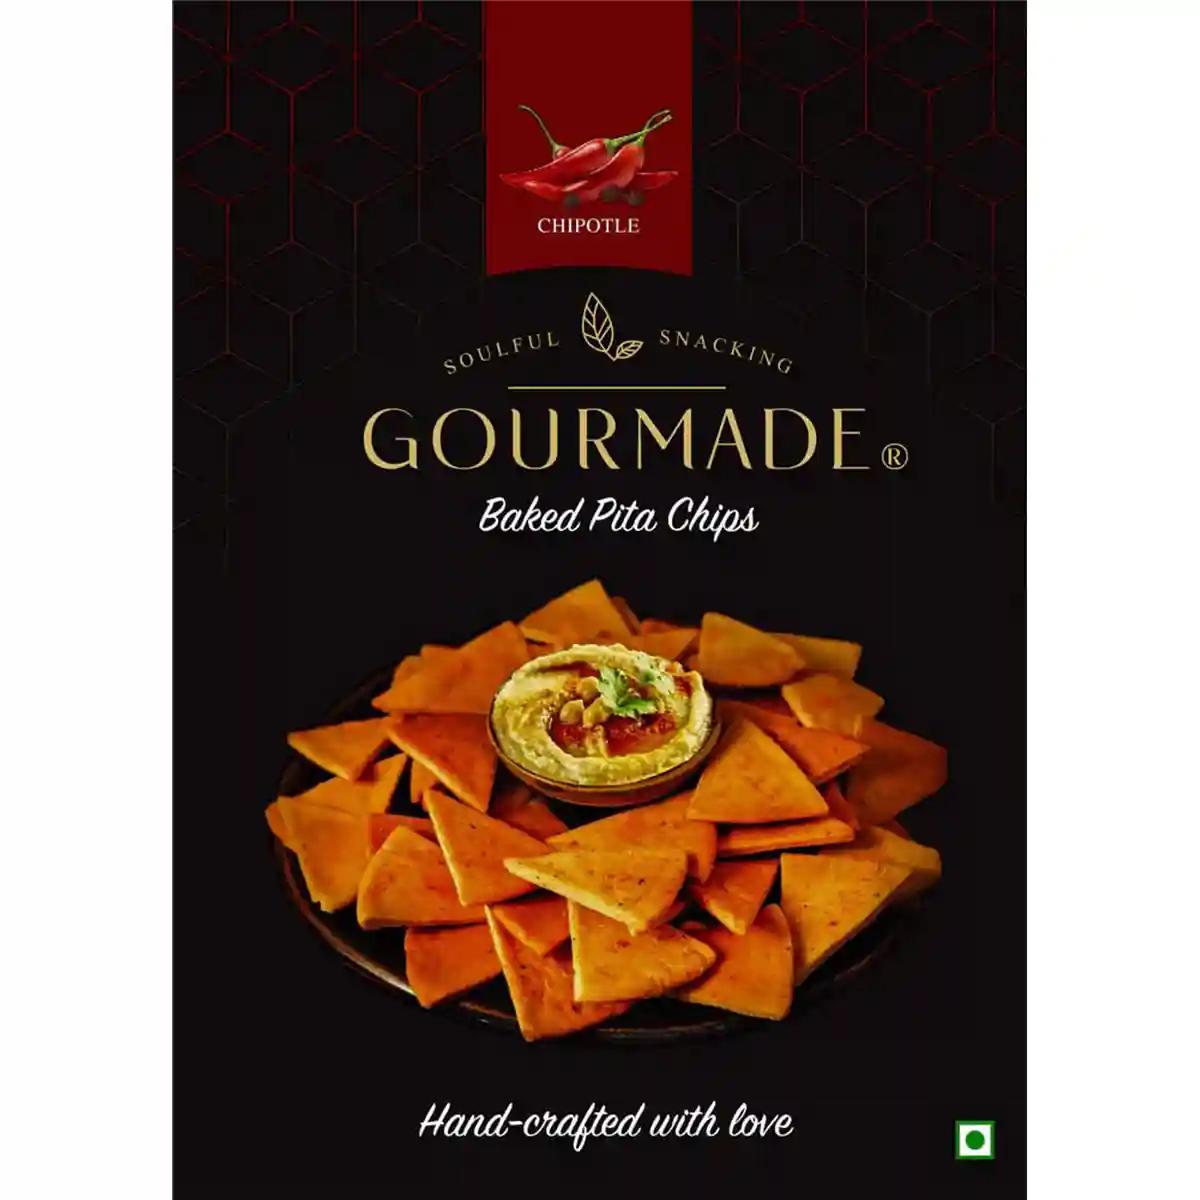 Gourmade Pita Chips Snacking Combo of 2 Olive & Herbs, 1 Chipotle (375gm)